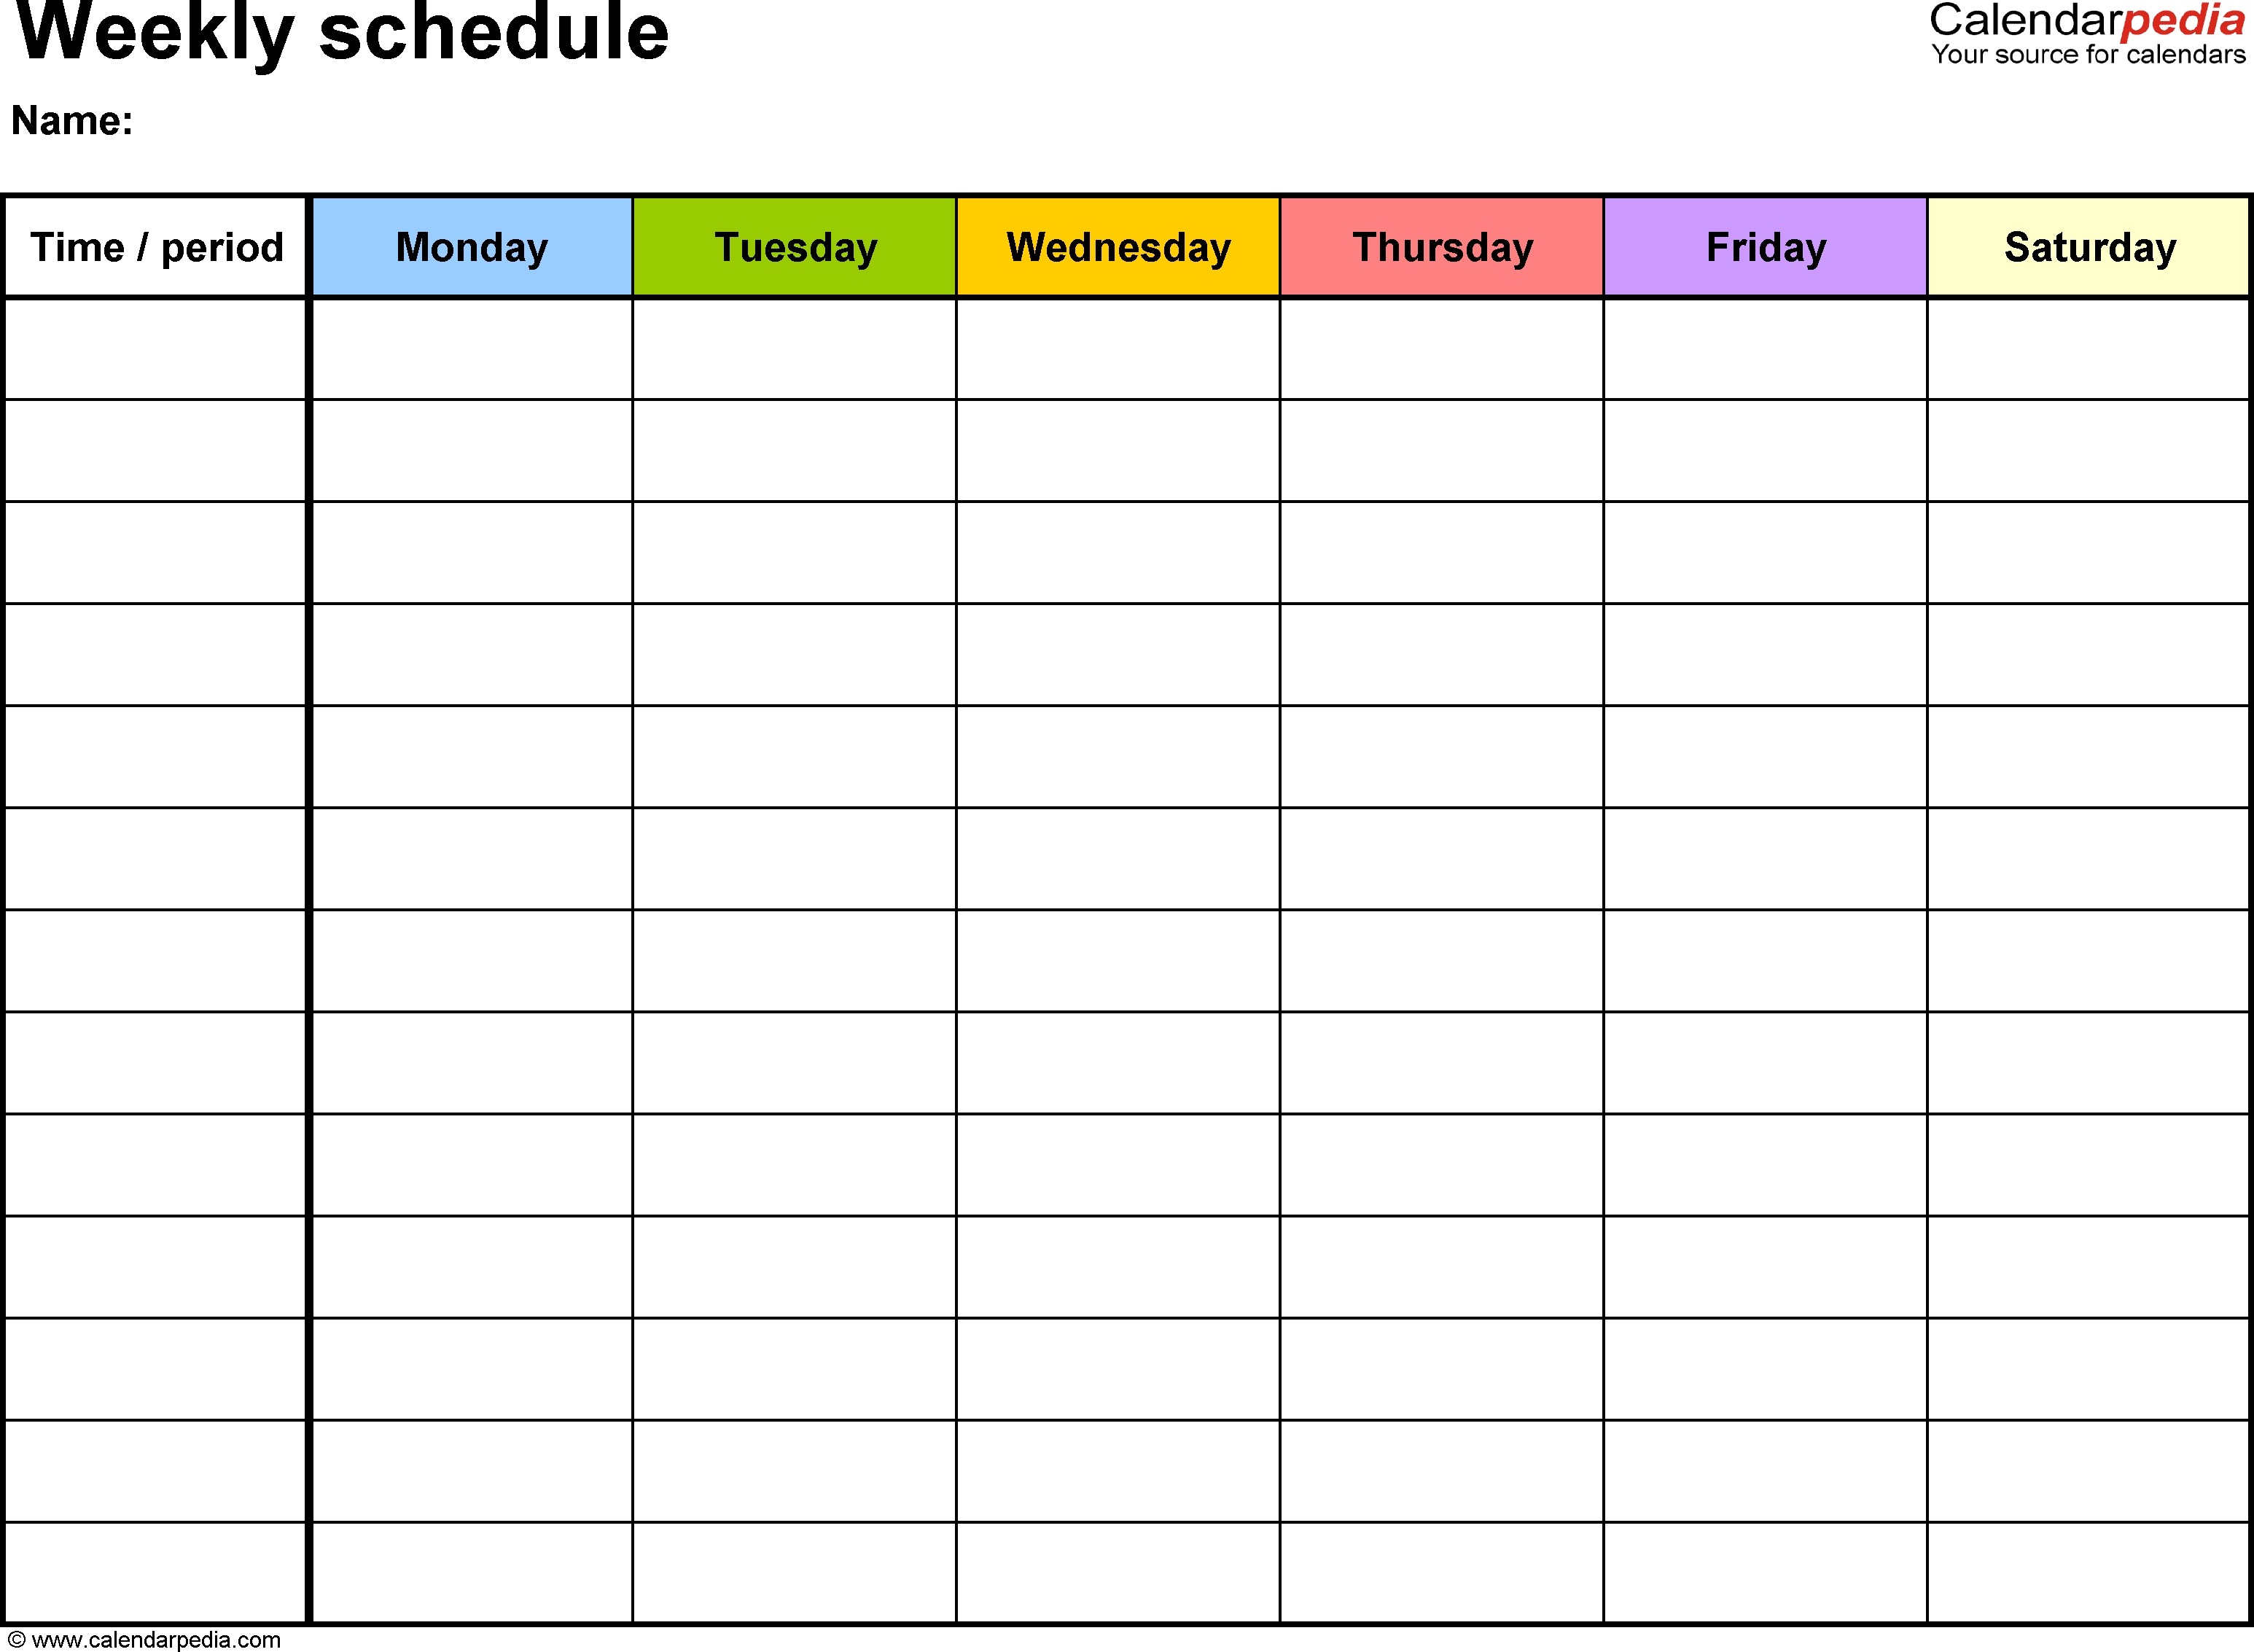 Free Ntable Schedule Calendar Template Weekly Templates For Word throughout 5 Day Week Blank Calendar With Time Slots Printable